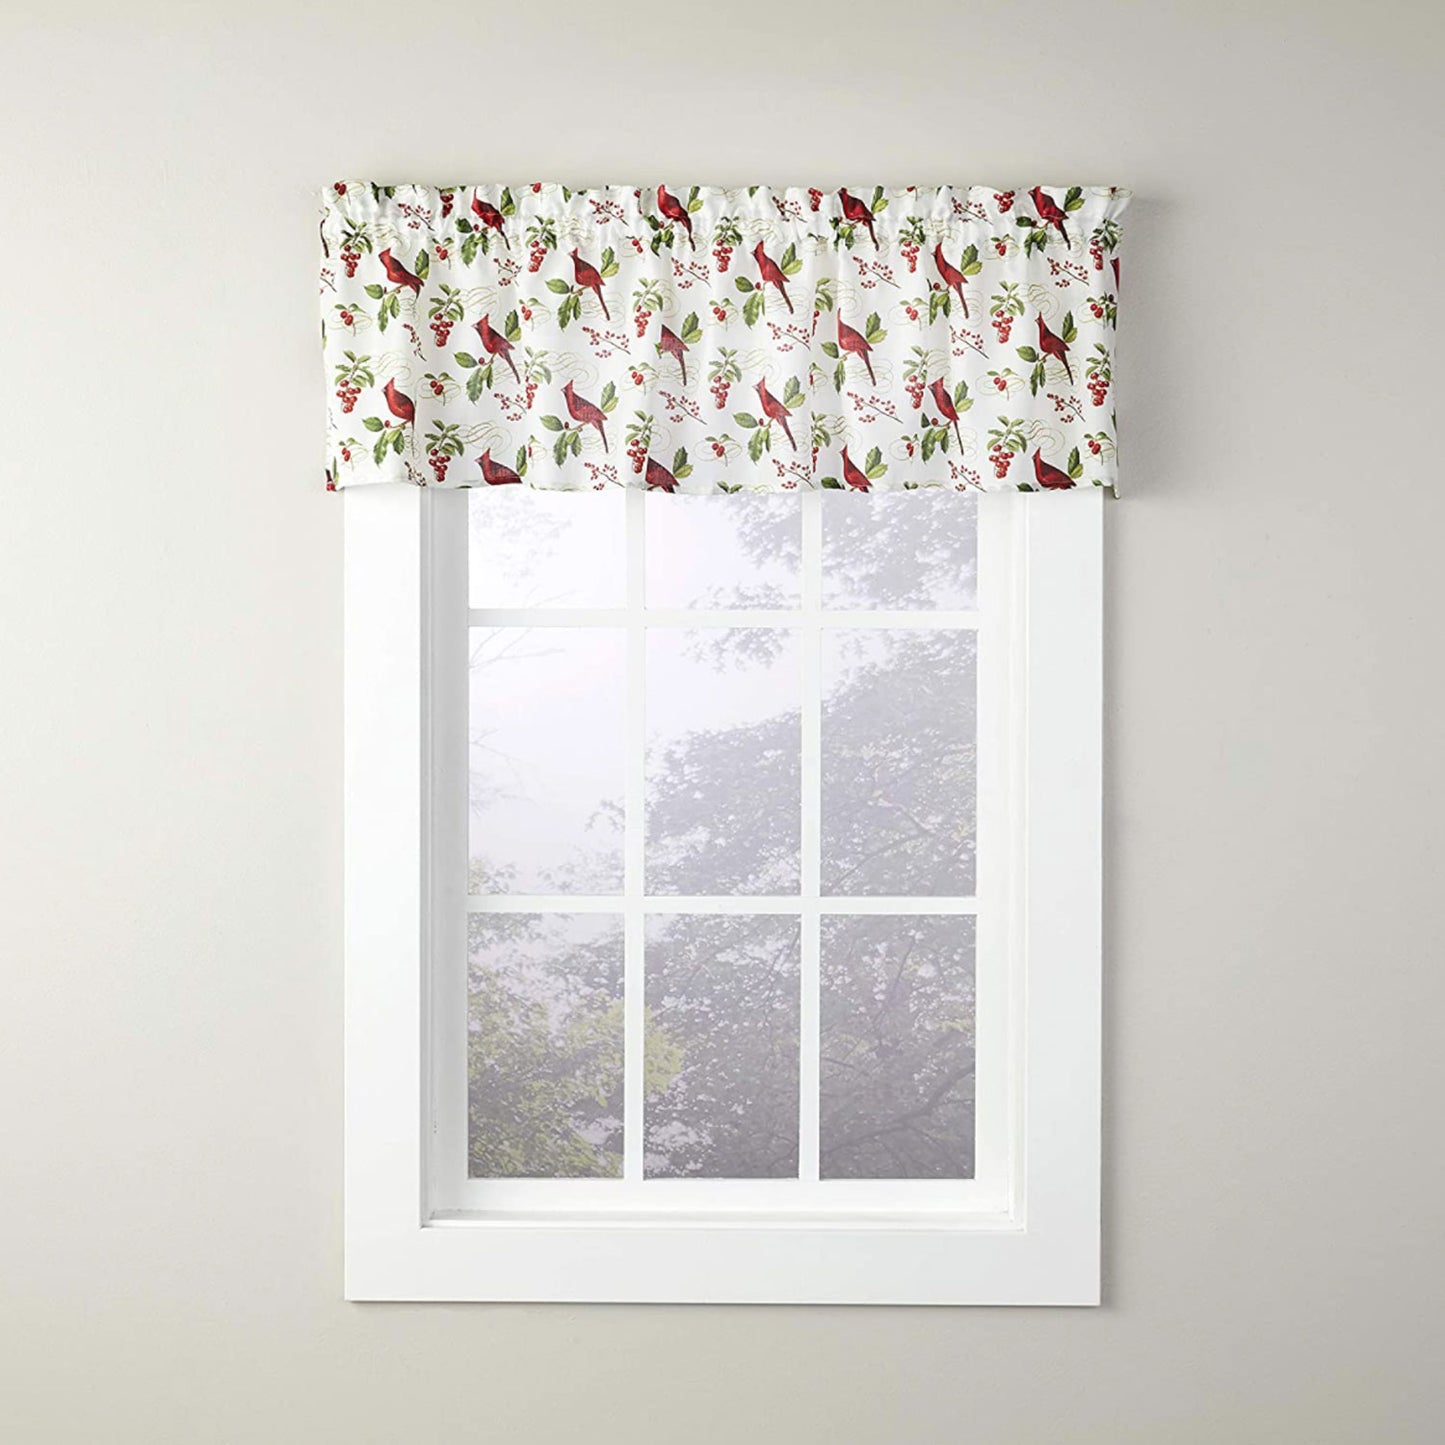 Cardinals & Berries Kitchen Tiers, Valance and Swag